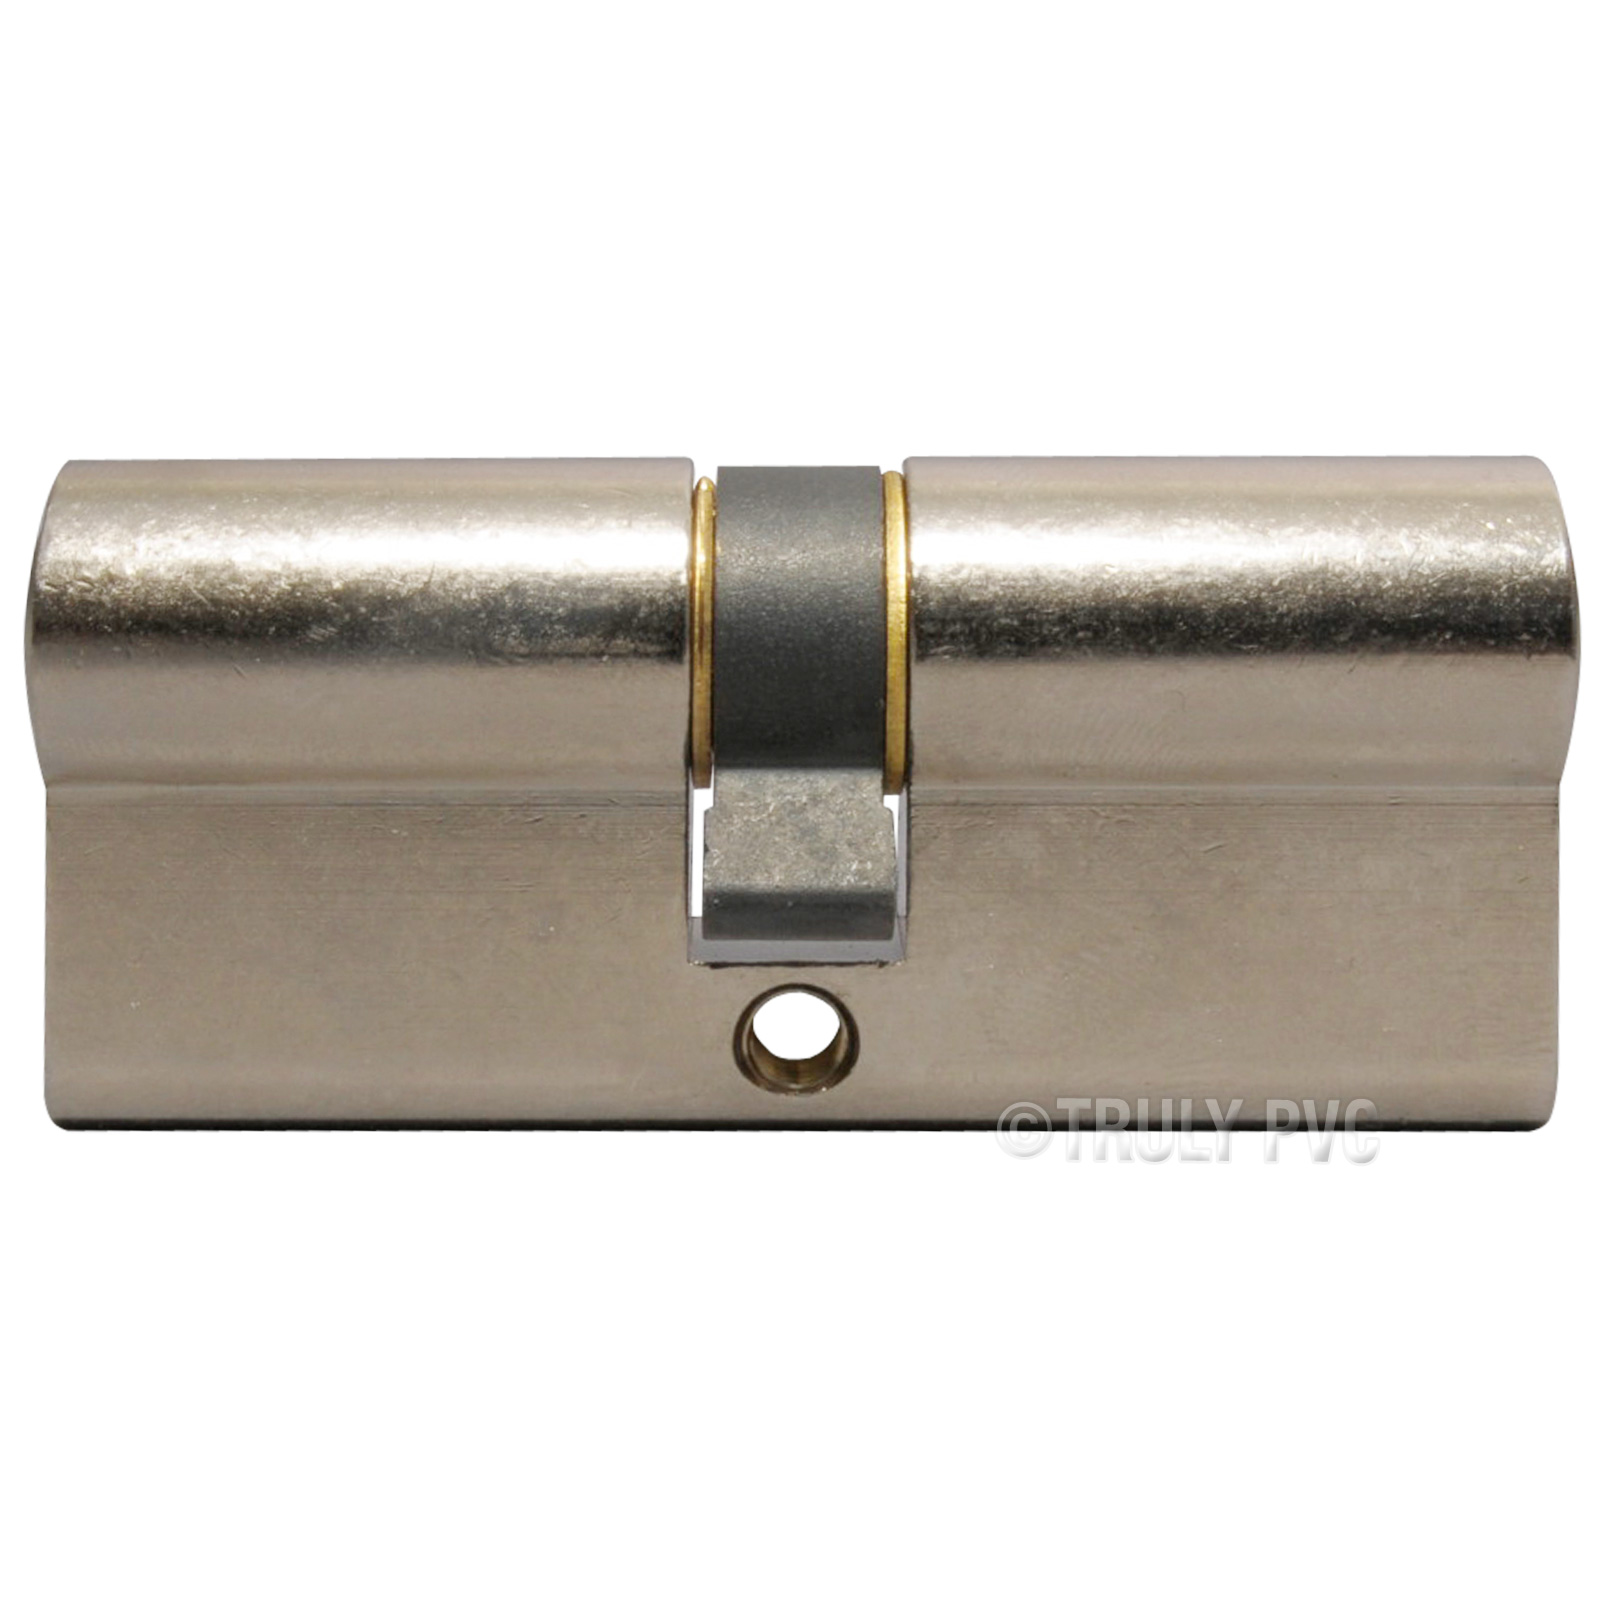 5 total Standard 6-Pin Security Euro Profile Barrel Door Lock for uPVC Multpoint Mechanisms 70mm overall 35/35 Polished Brass Yale Euro Cylinder with 2 Extra Keys 